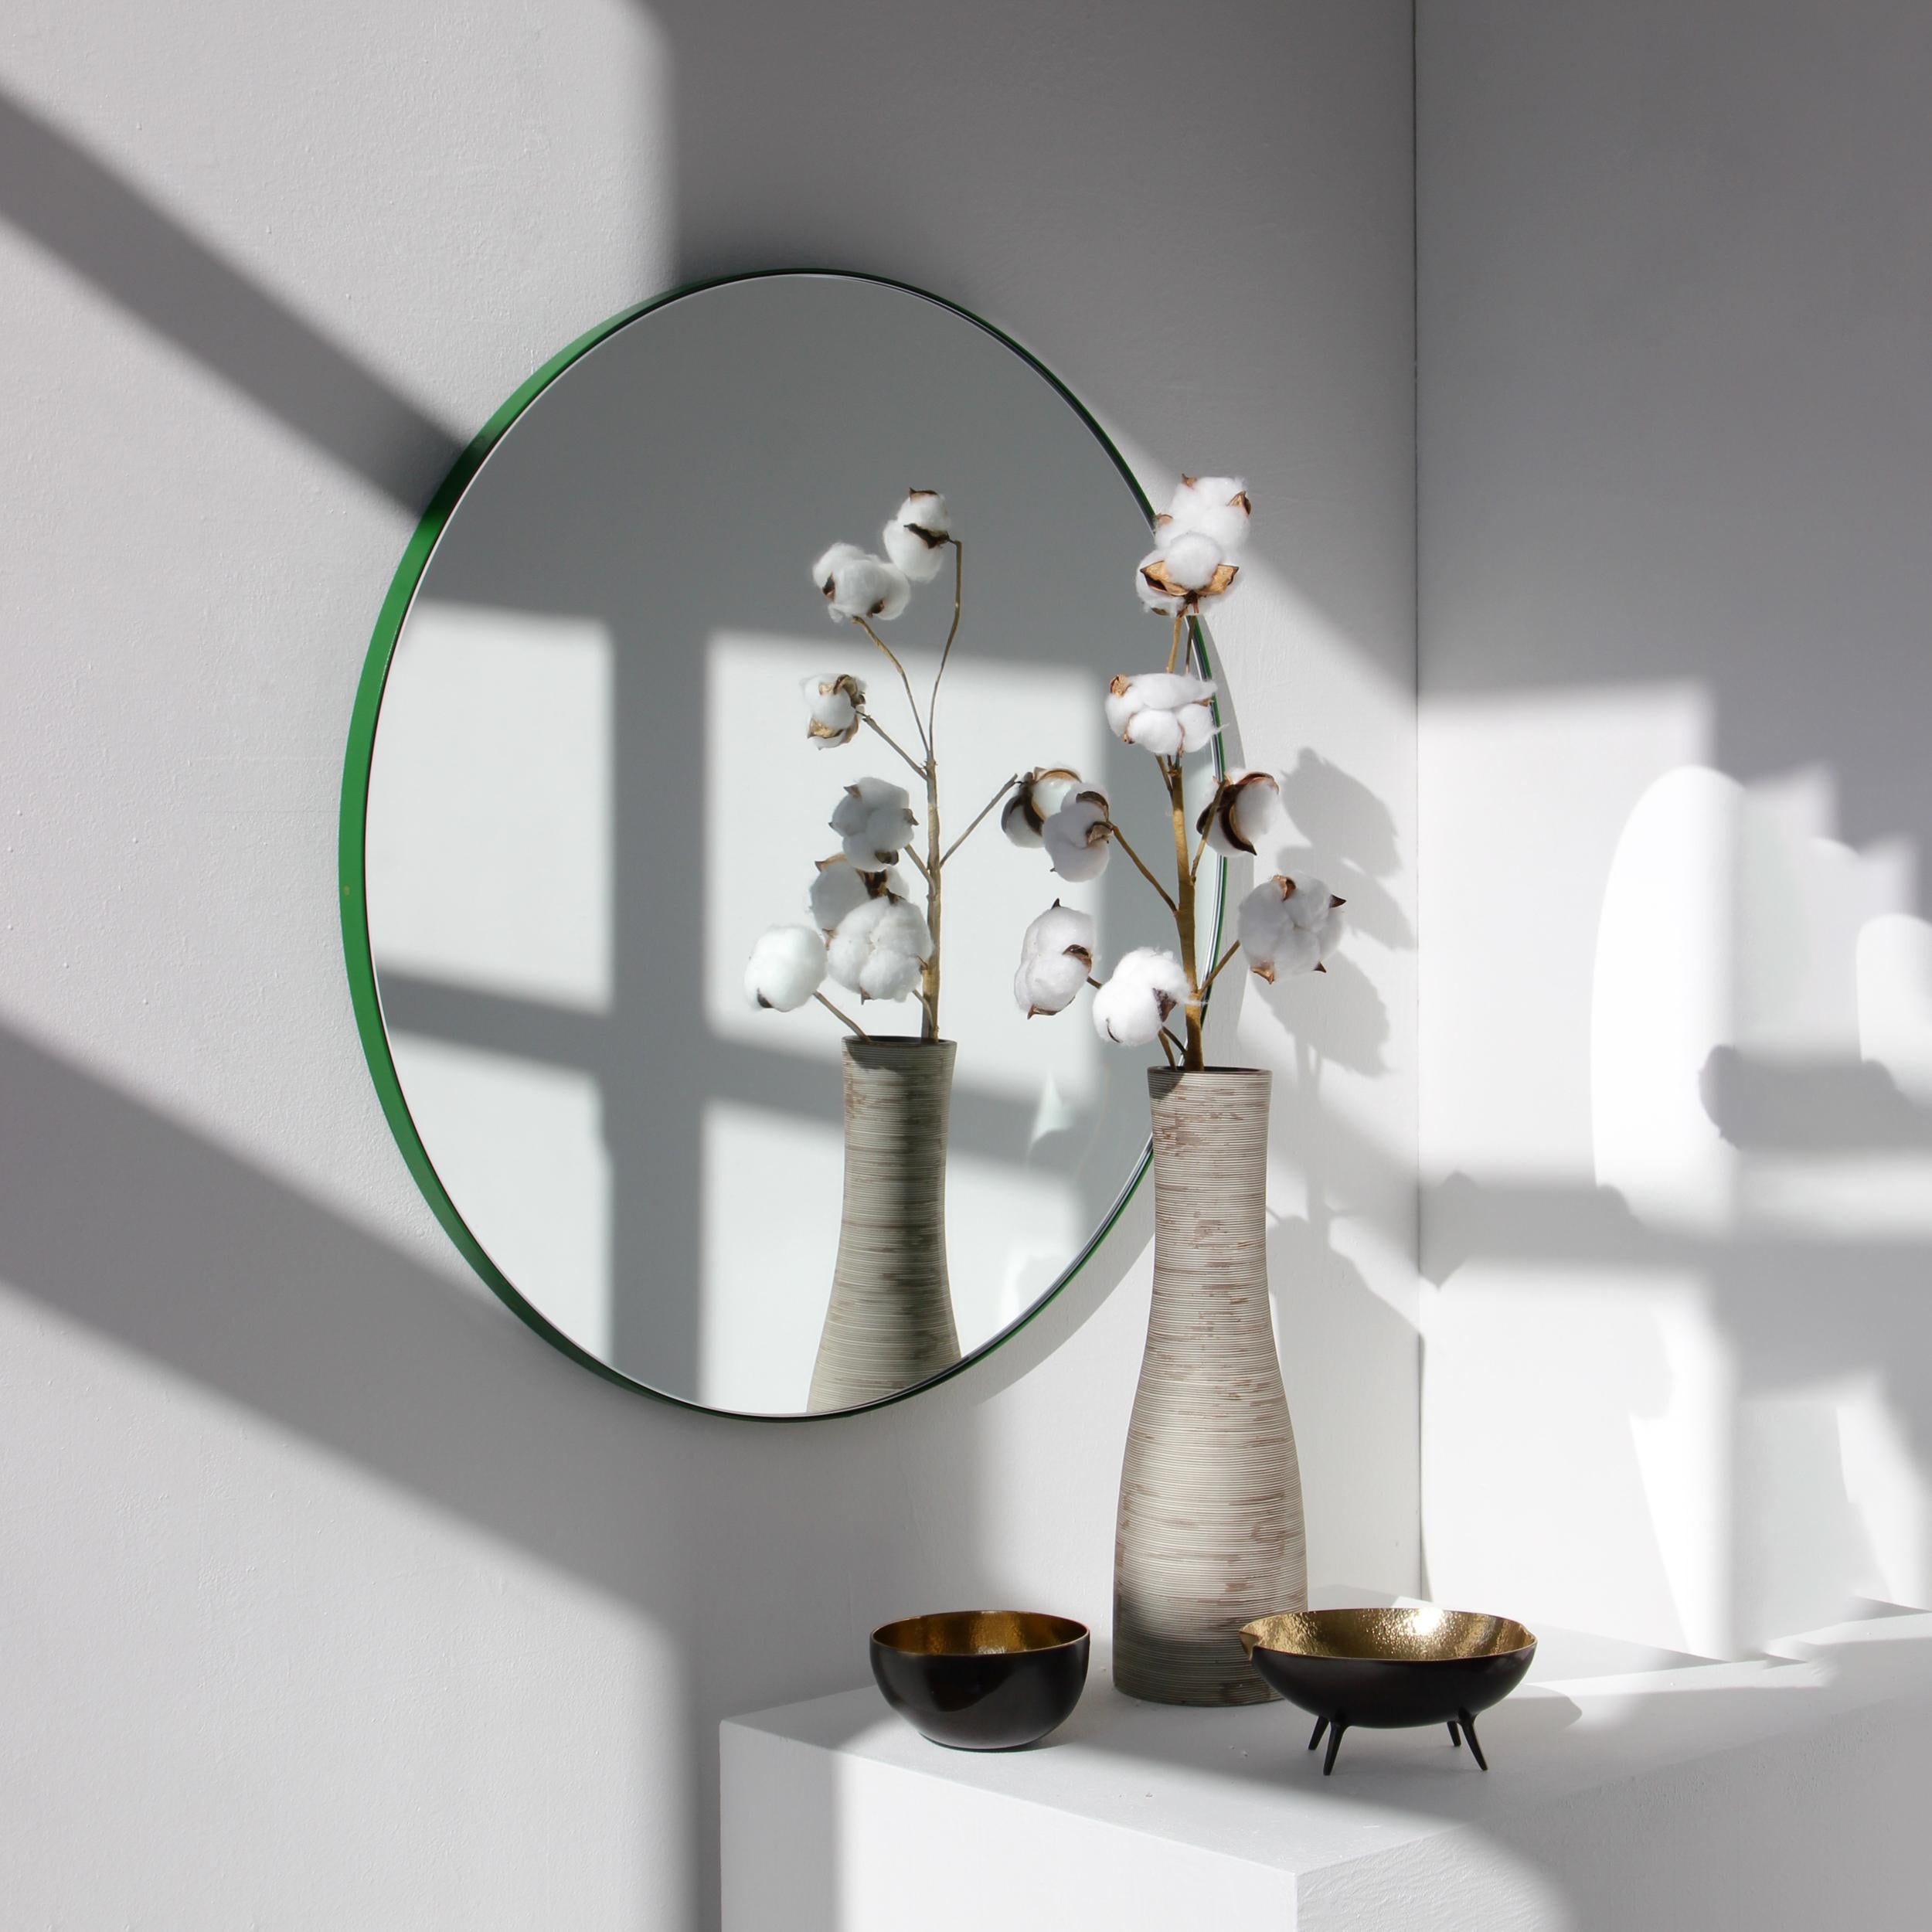 Minimalist round mirror with a lively aluminium powder coated green frame. Designed and handcrafted in London, UK.

Our mirrors are designed with an integrated French cleat (split batten) system that ensures the mirror is securely mounted flush with